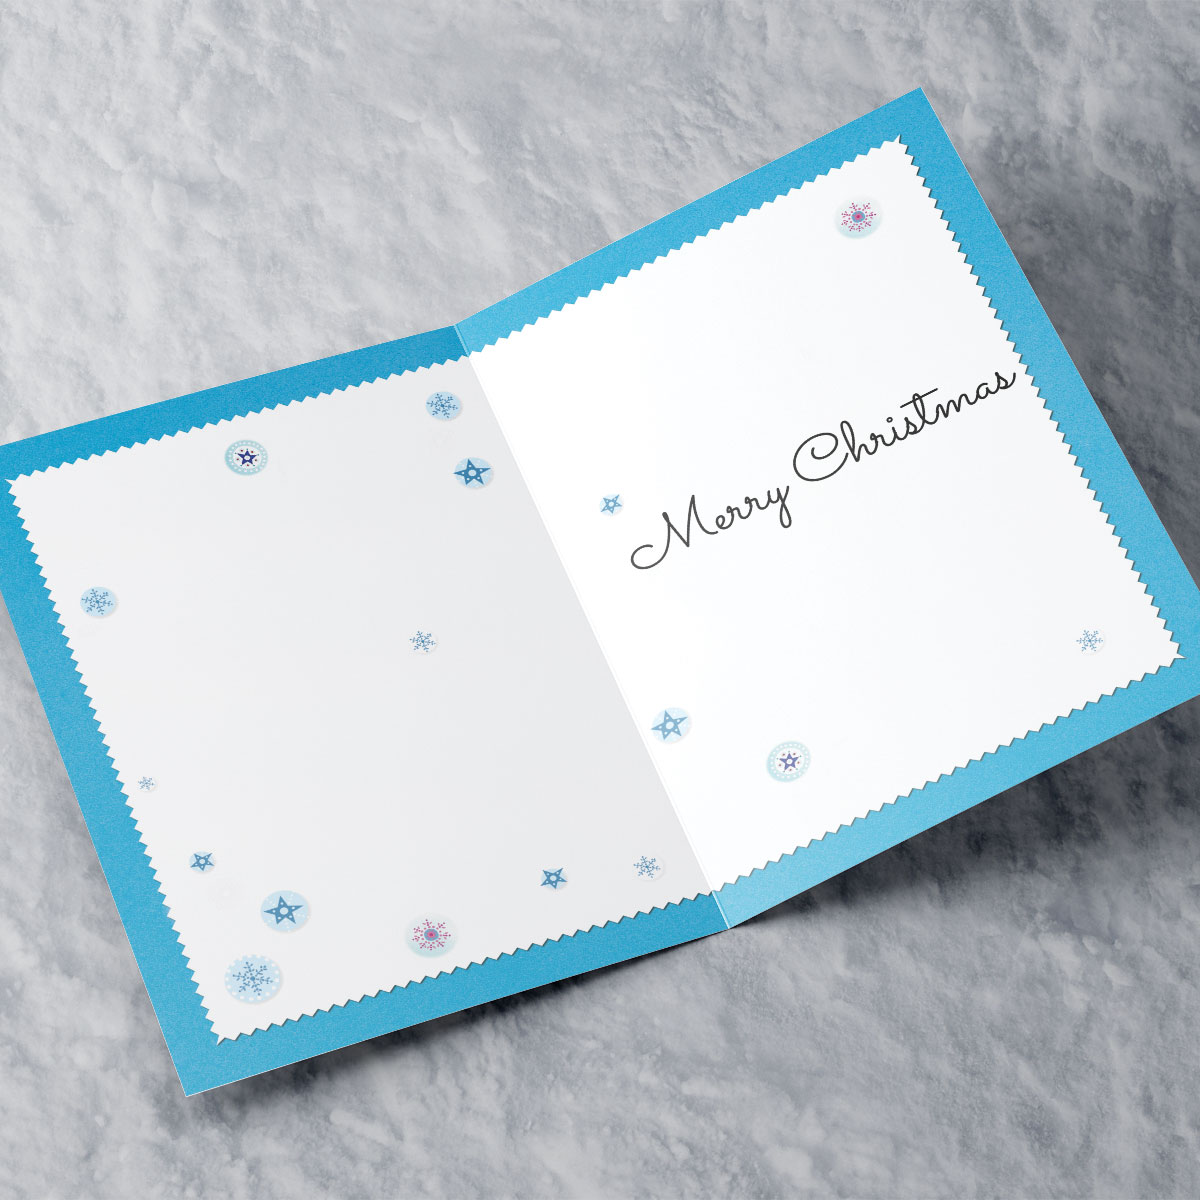 Personalised Christmas Card - Blue Snowman